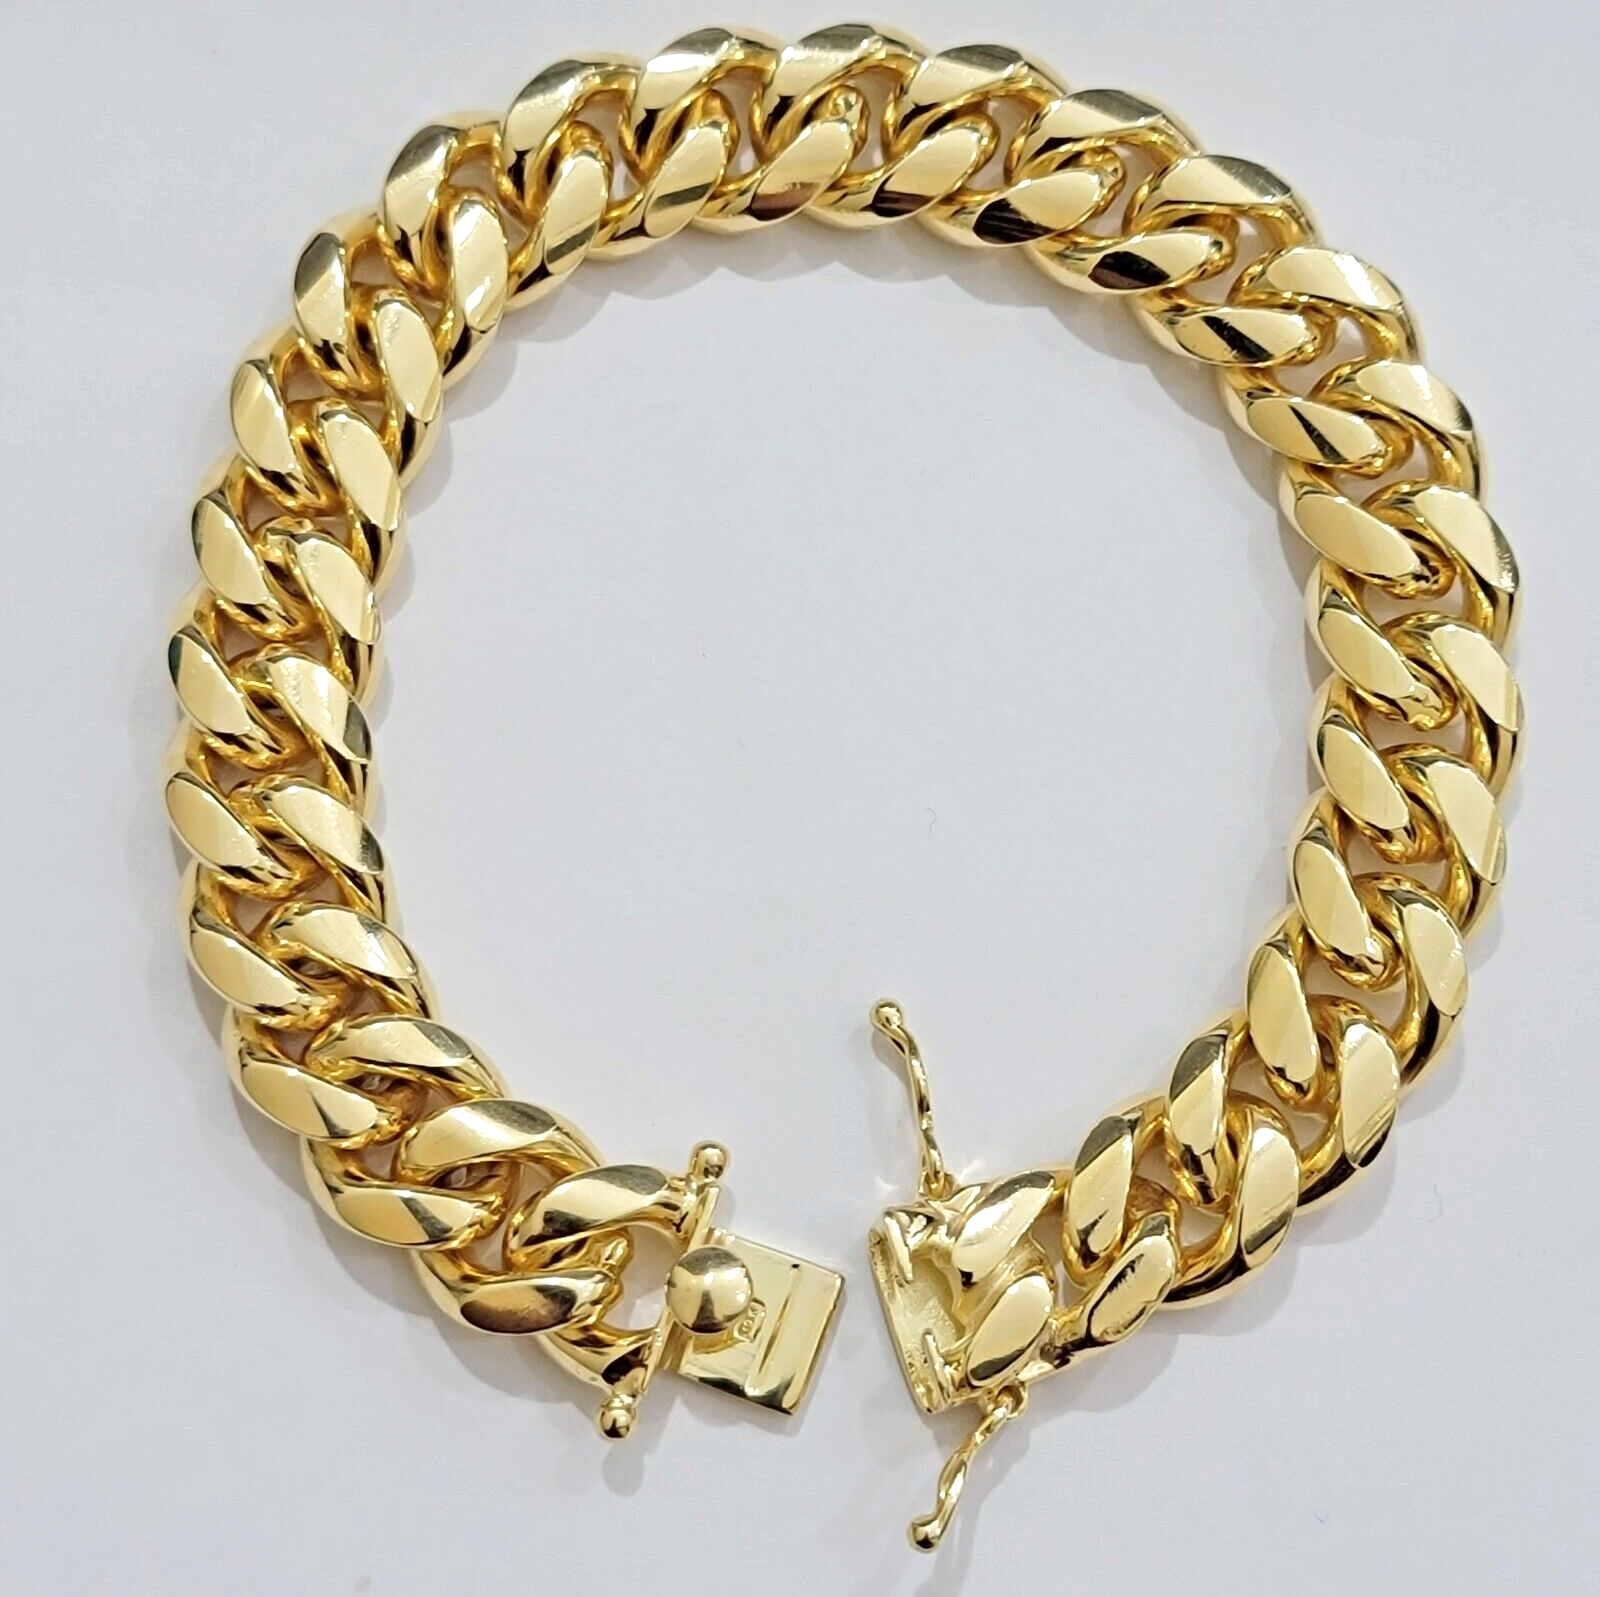 Solid 10k Gold Bracelet 12mm Miami Cuban Link 9 Inch Box Clasp Mens REAL 10KT